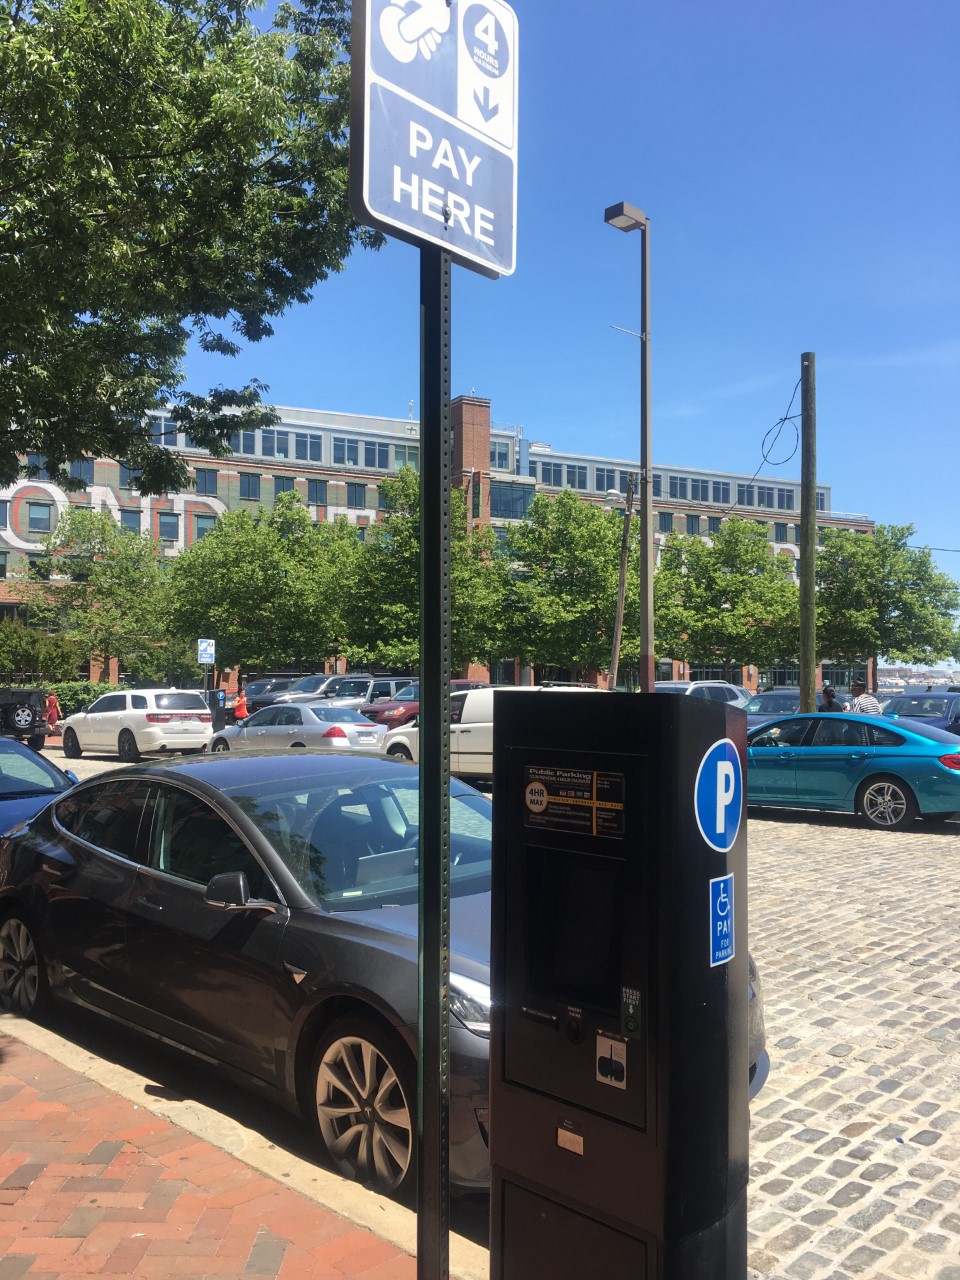 fells point parking meter and cobblestone street